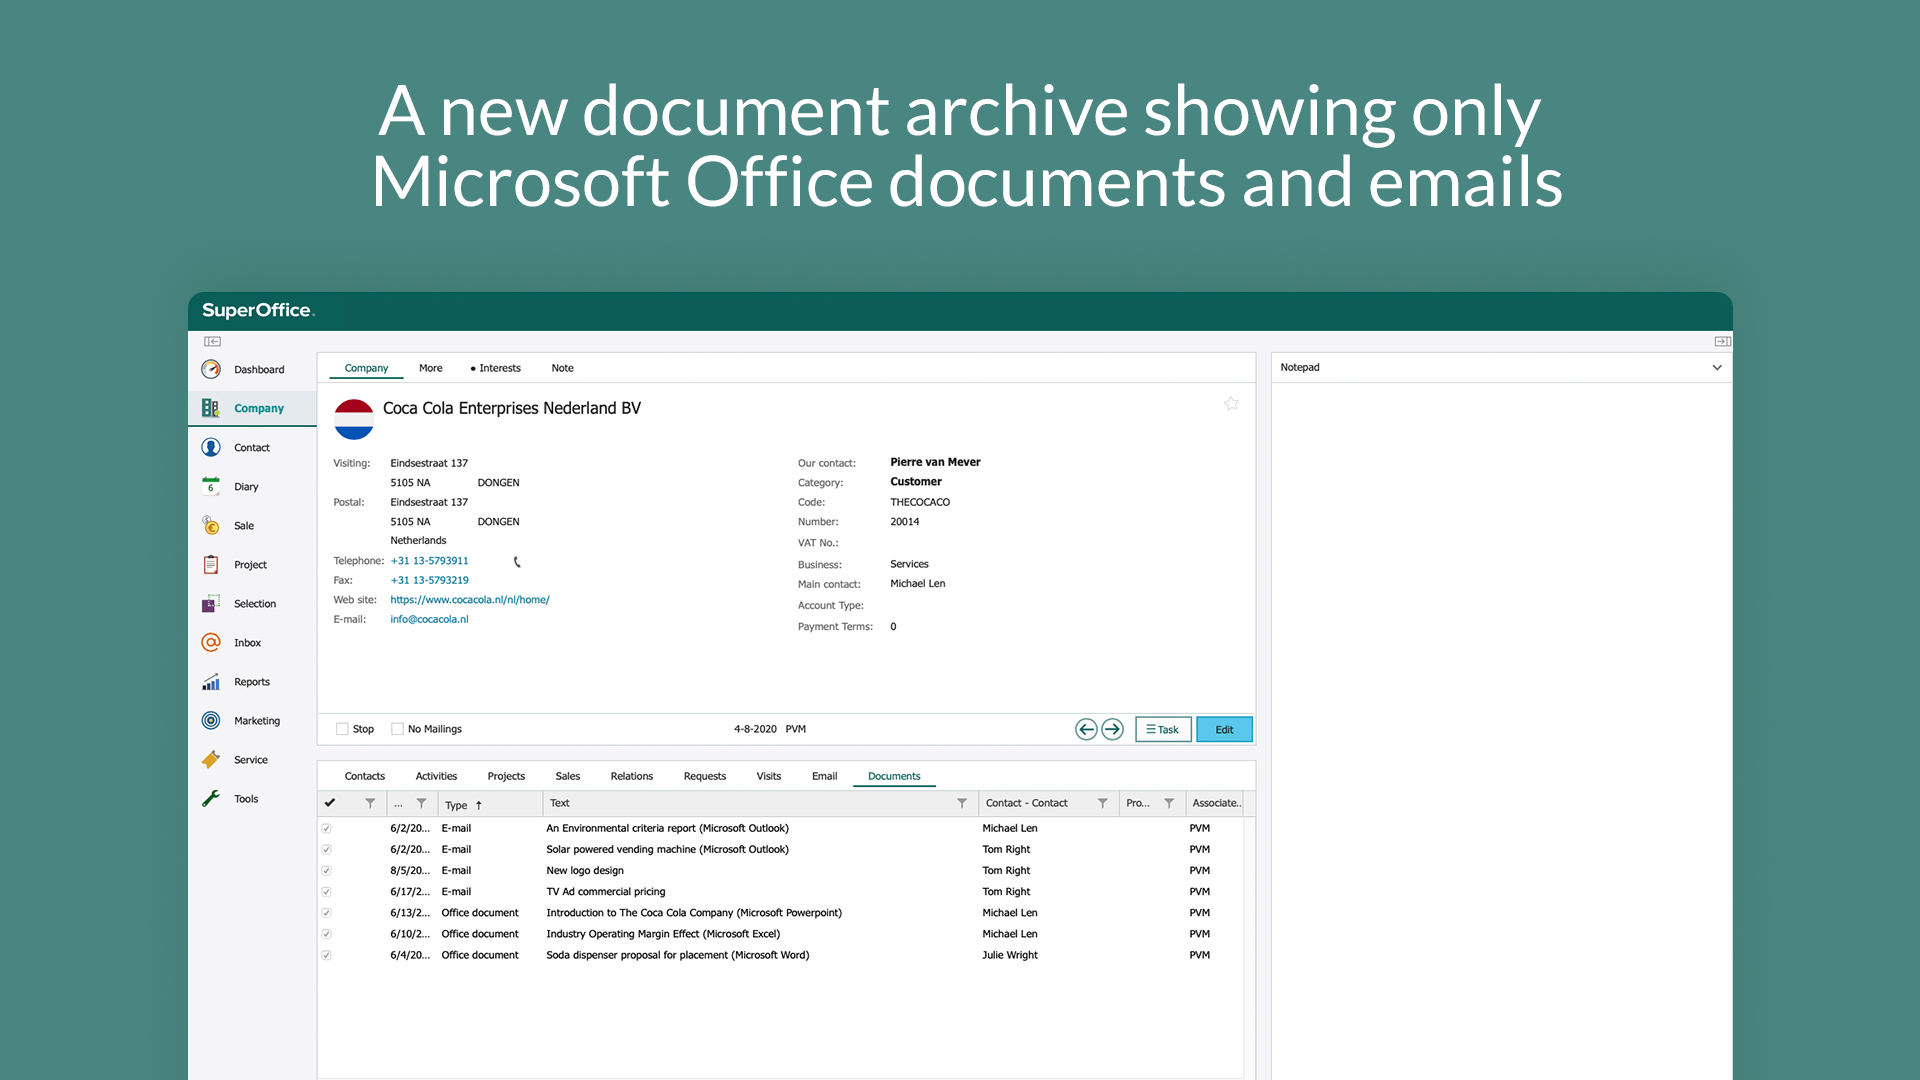 3. A new document archive showing documents by type for Office and emails.png